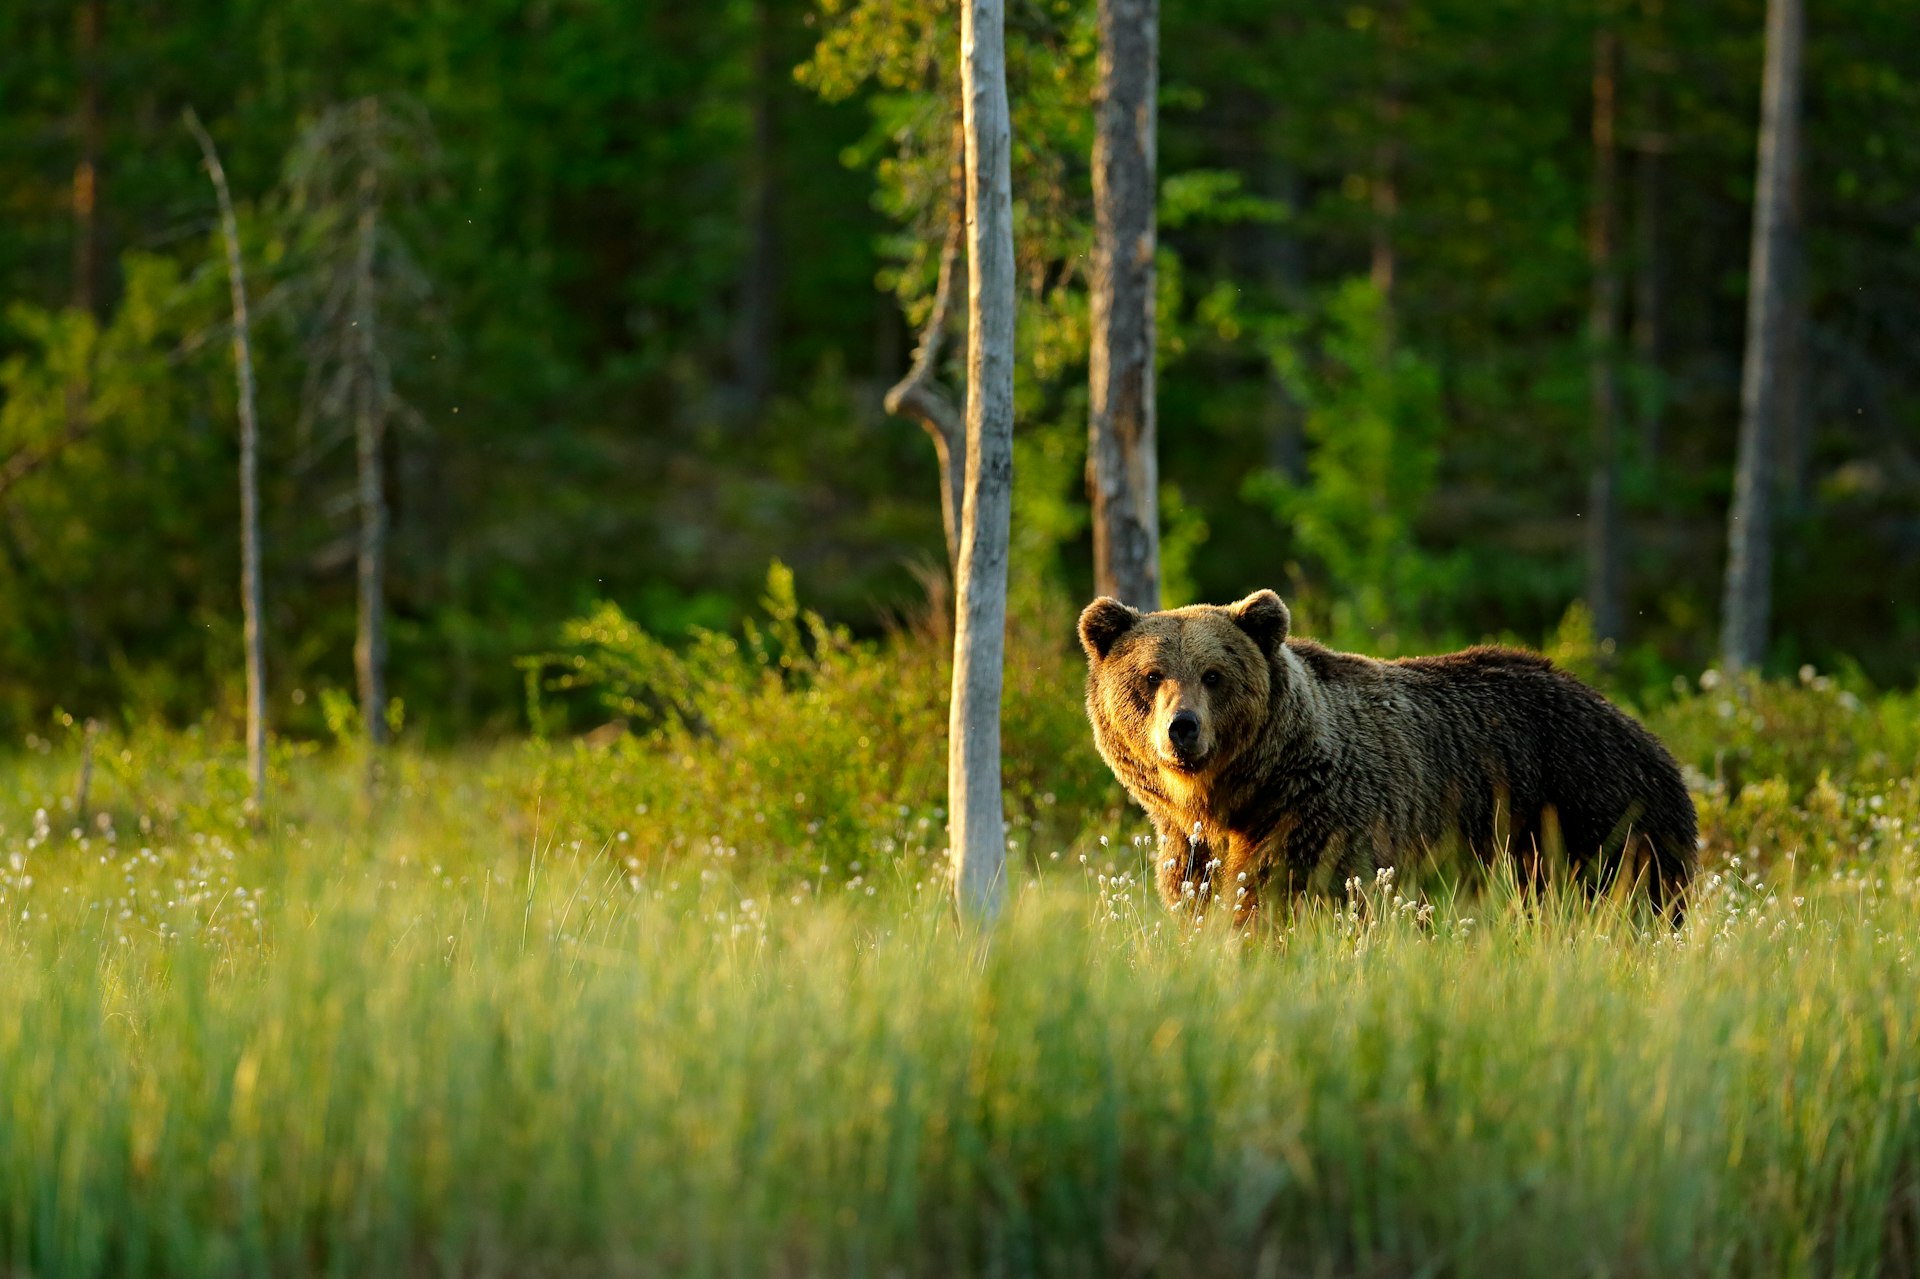 Sunset, morning light with big brown bear walking around lake in the morning light. Dangerous animal in nature forest and meadow habitat: wildlife scene from Finland, near Russian border